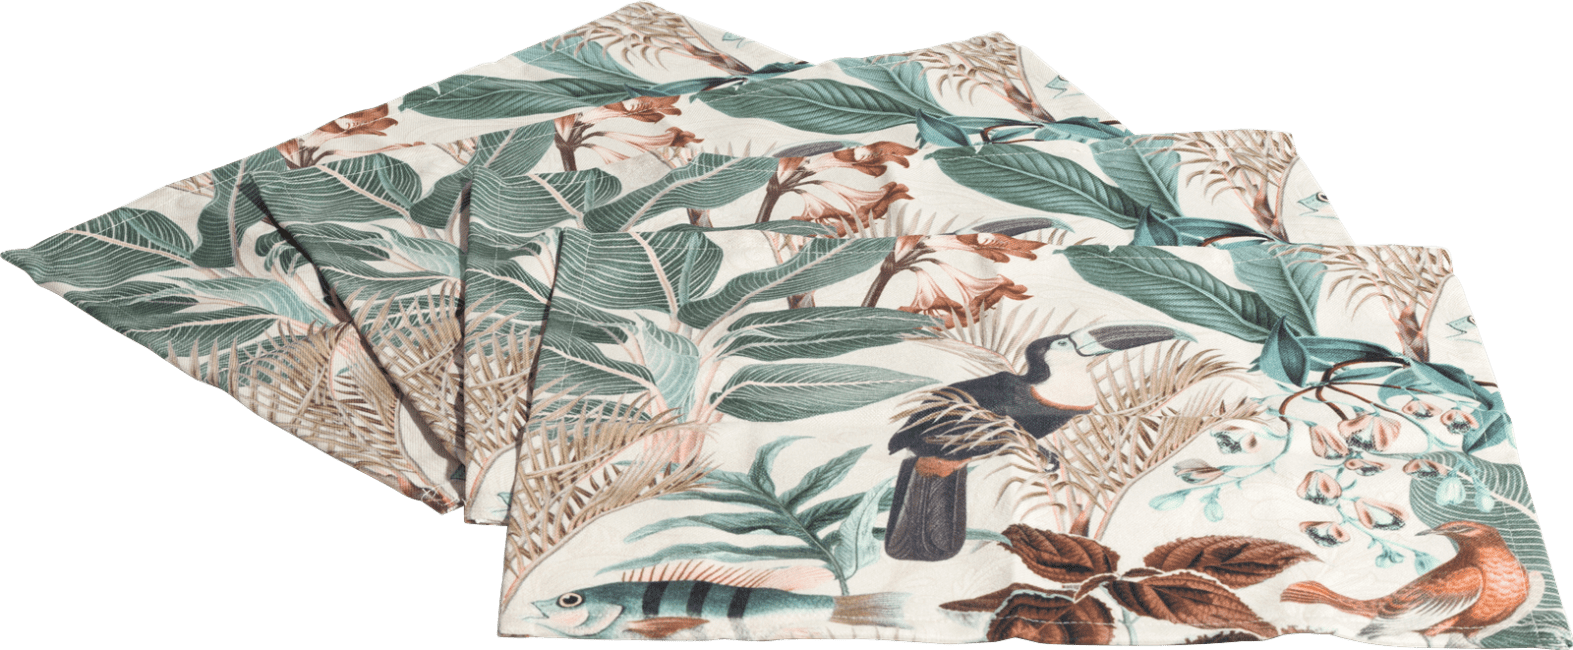 XOOON - Coco Maison - Summer Jungle set of 4 placemats 44 x 33 cm